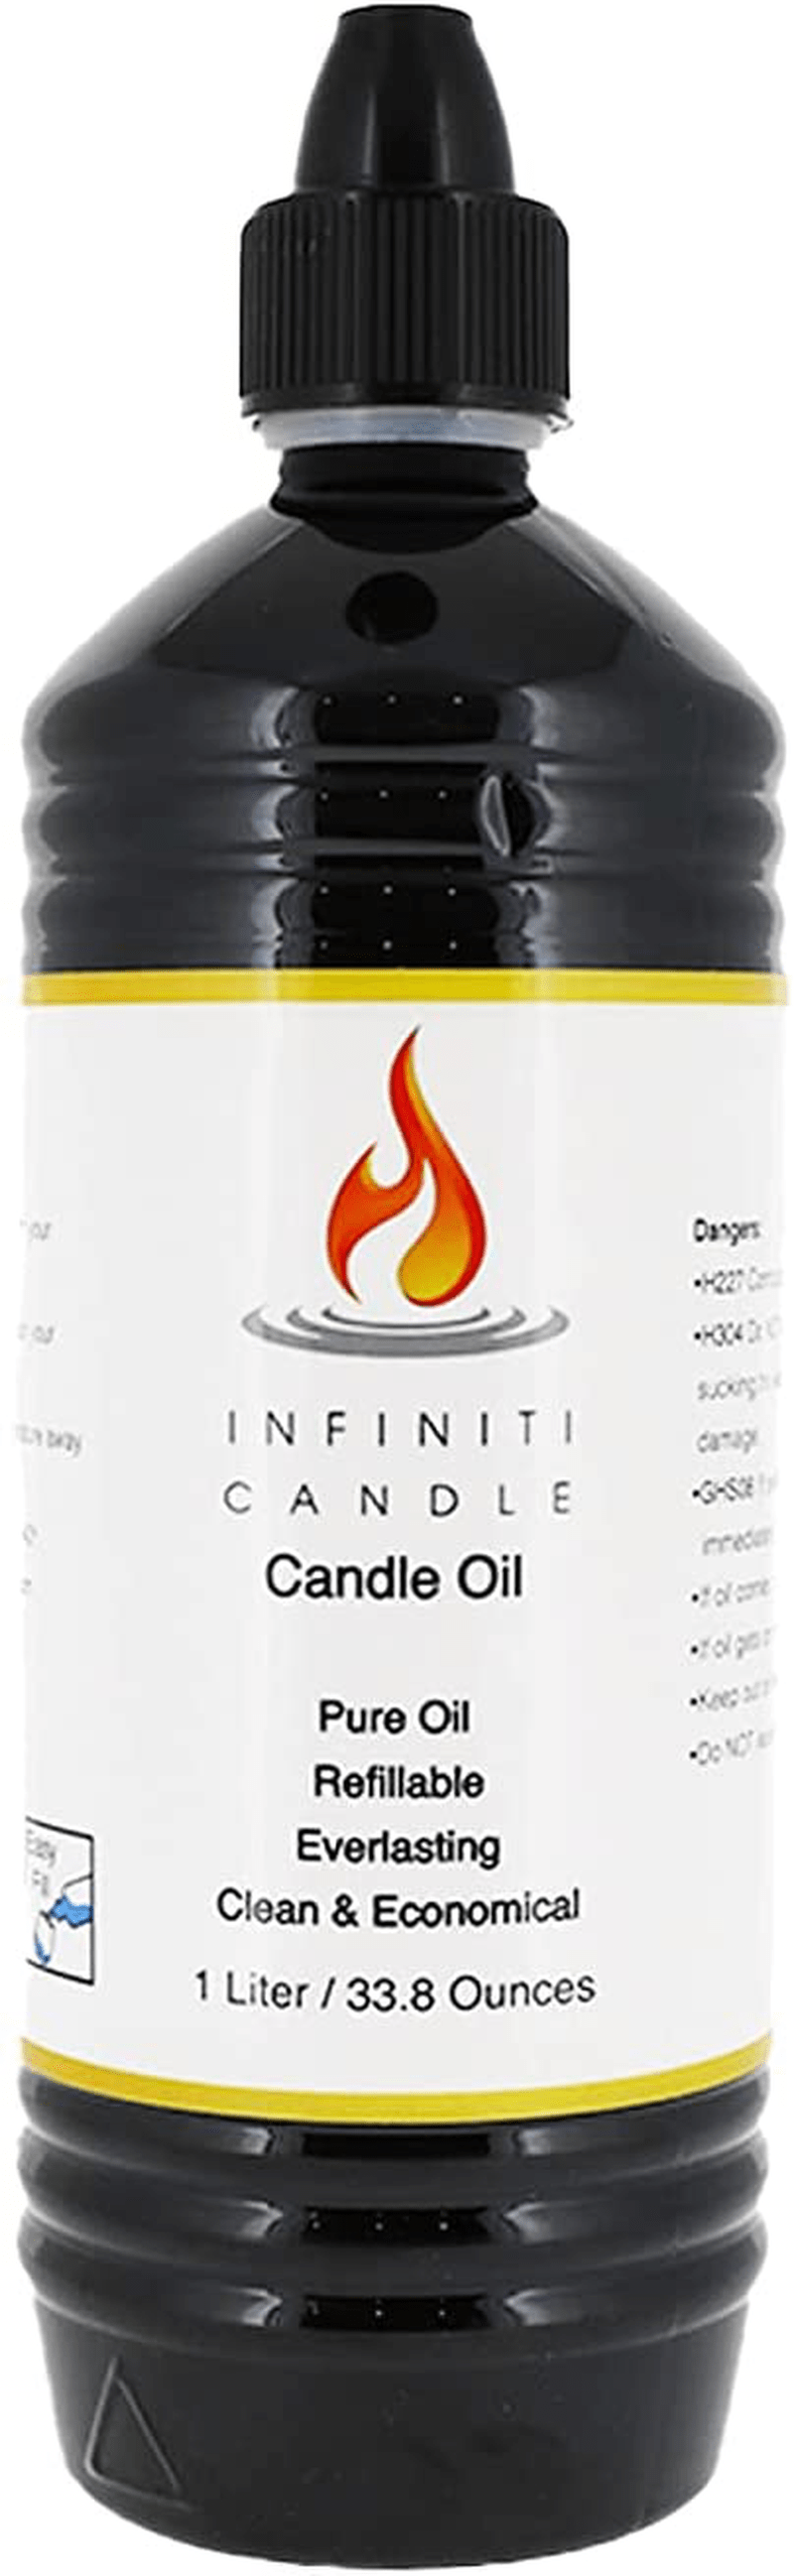 1 Liter Lamp Oil For Torches Lamp And Lanterns, Clear Fluid Safe For Indoor And Outdoor Use. Created For Infiniti Refillable Oil Candle. Unscented And Smokeless . Child safety cap and easy pour spout.